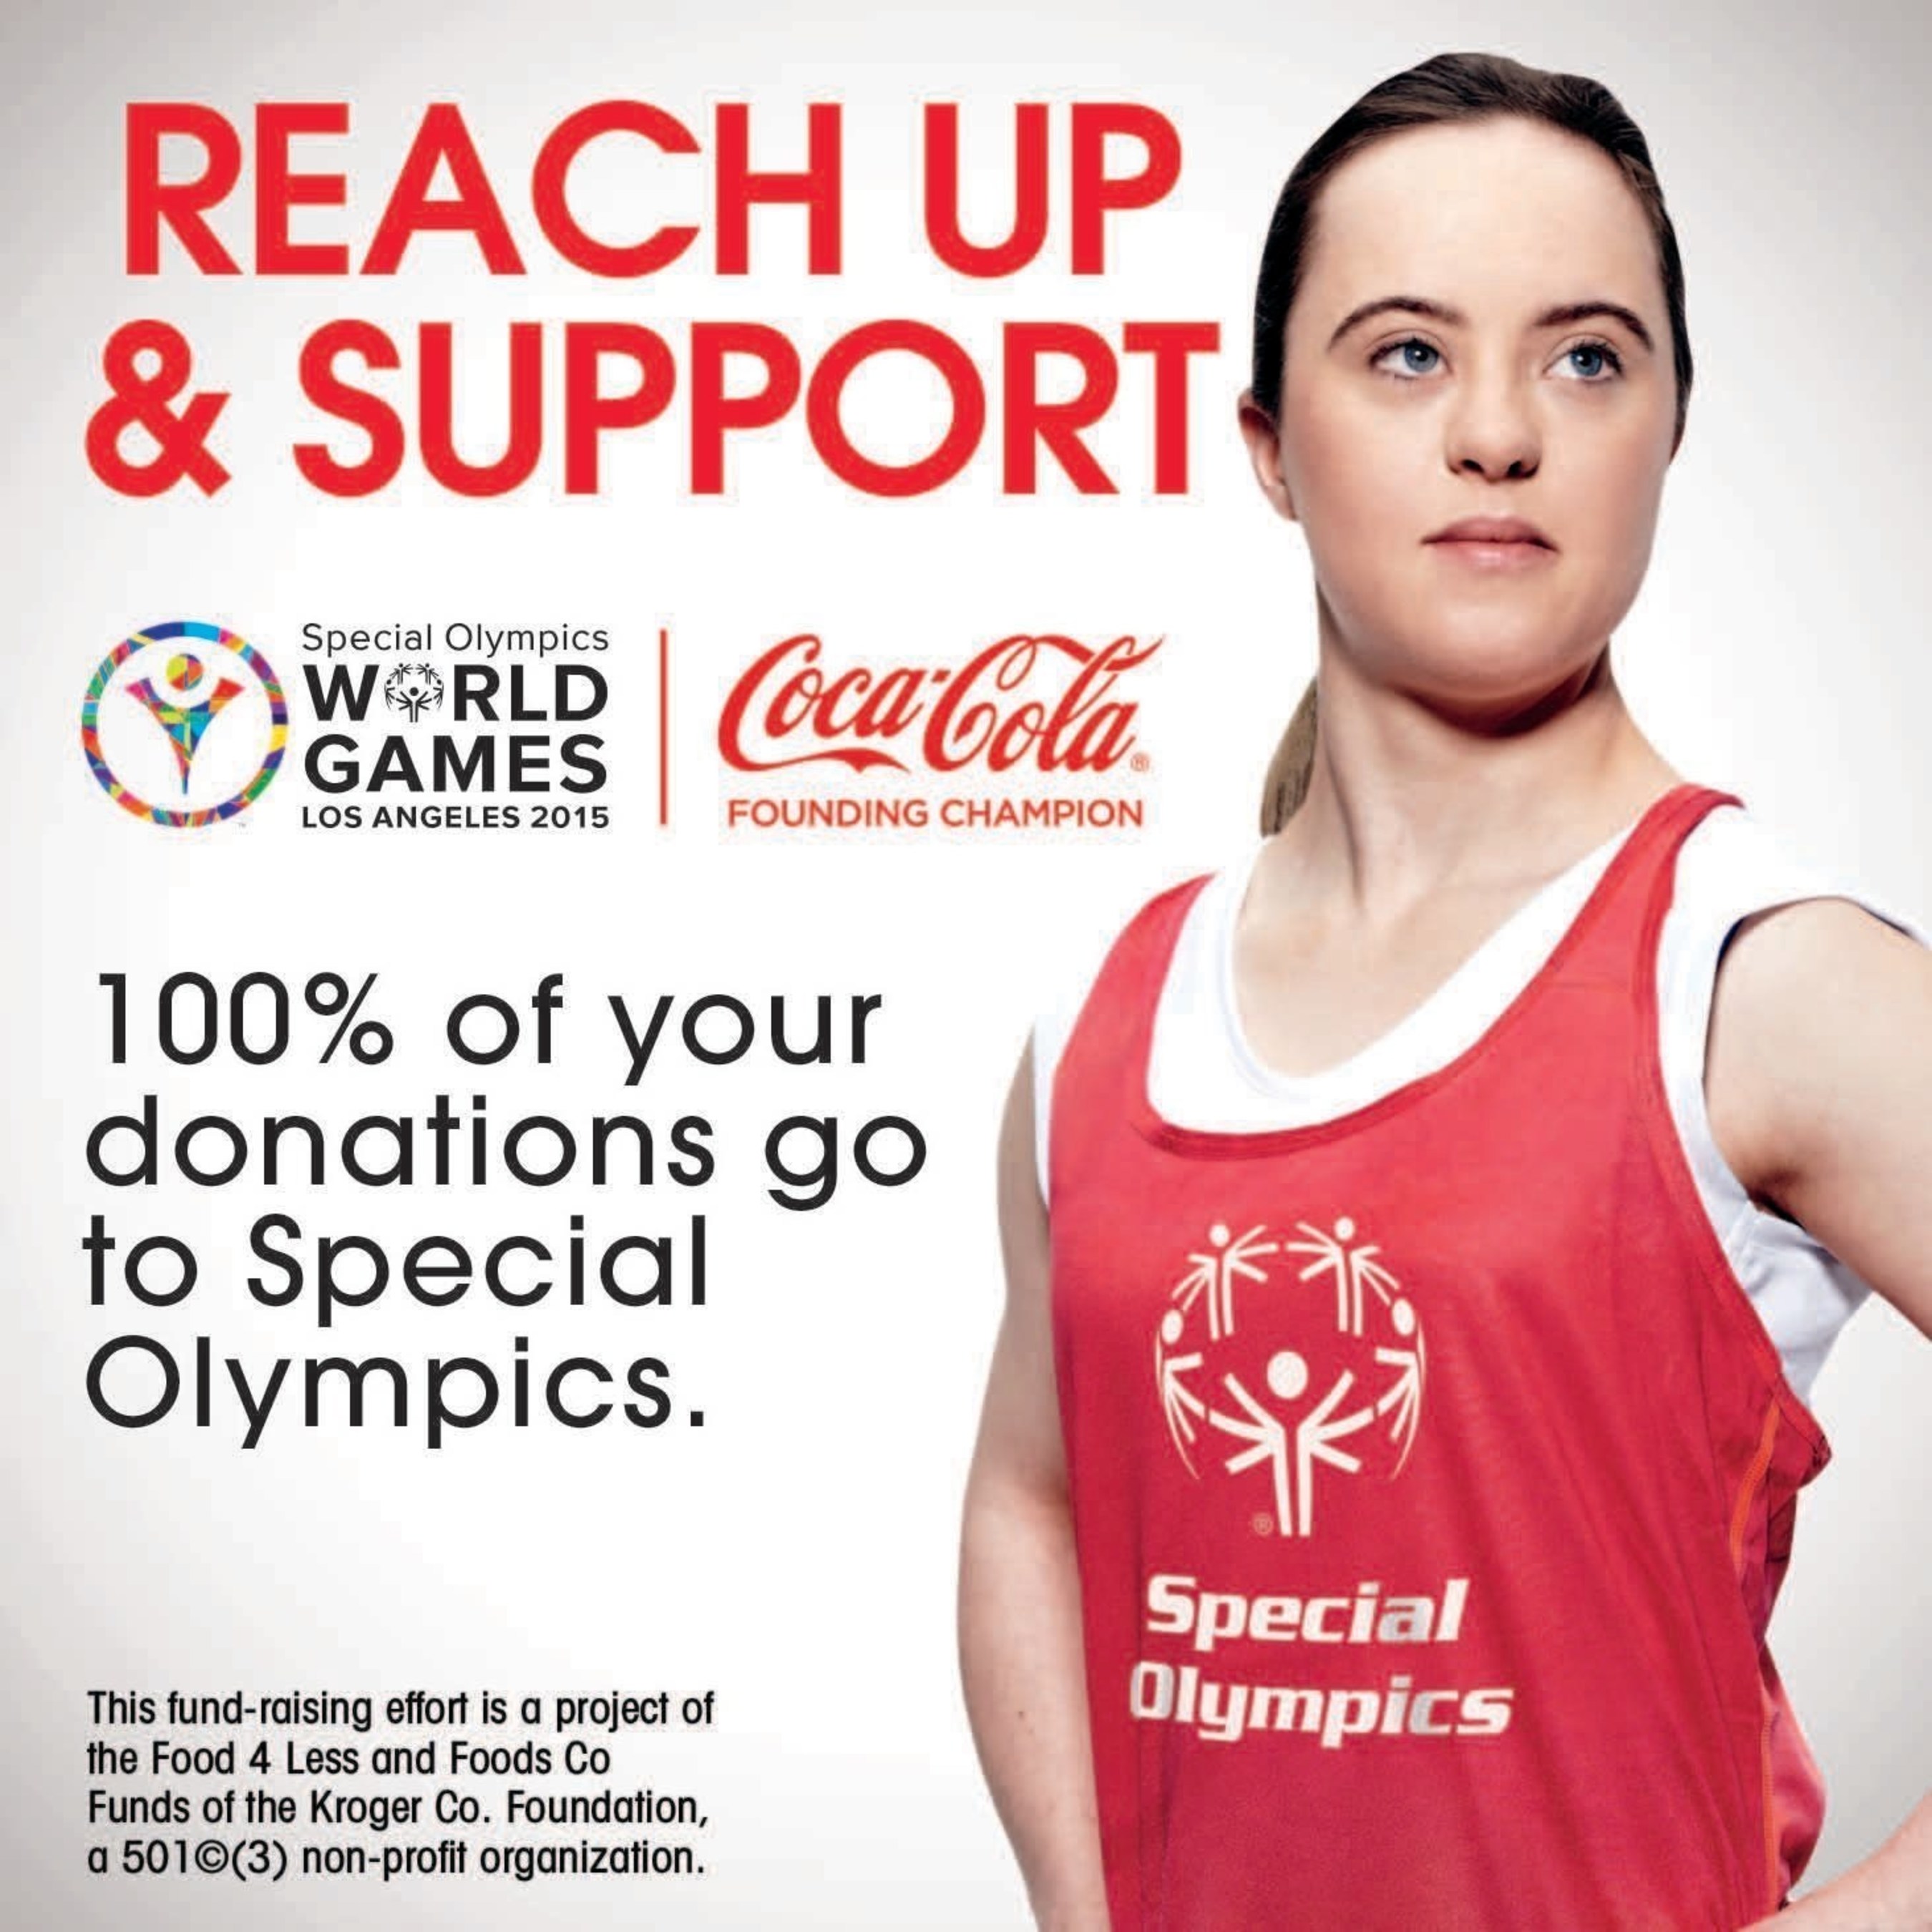 Customers may support Special Olympics by donating their spare change in the checkstand canisters featuring this message in Southern California and Chicago-area Food 4 Less stores and Central and Northern California Foods Co stores.